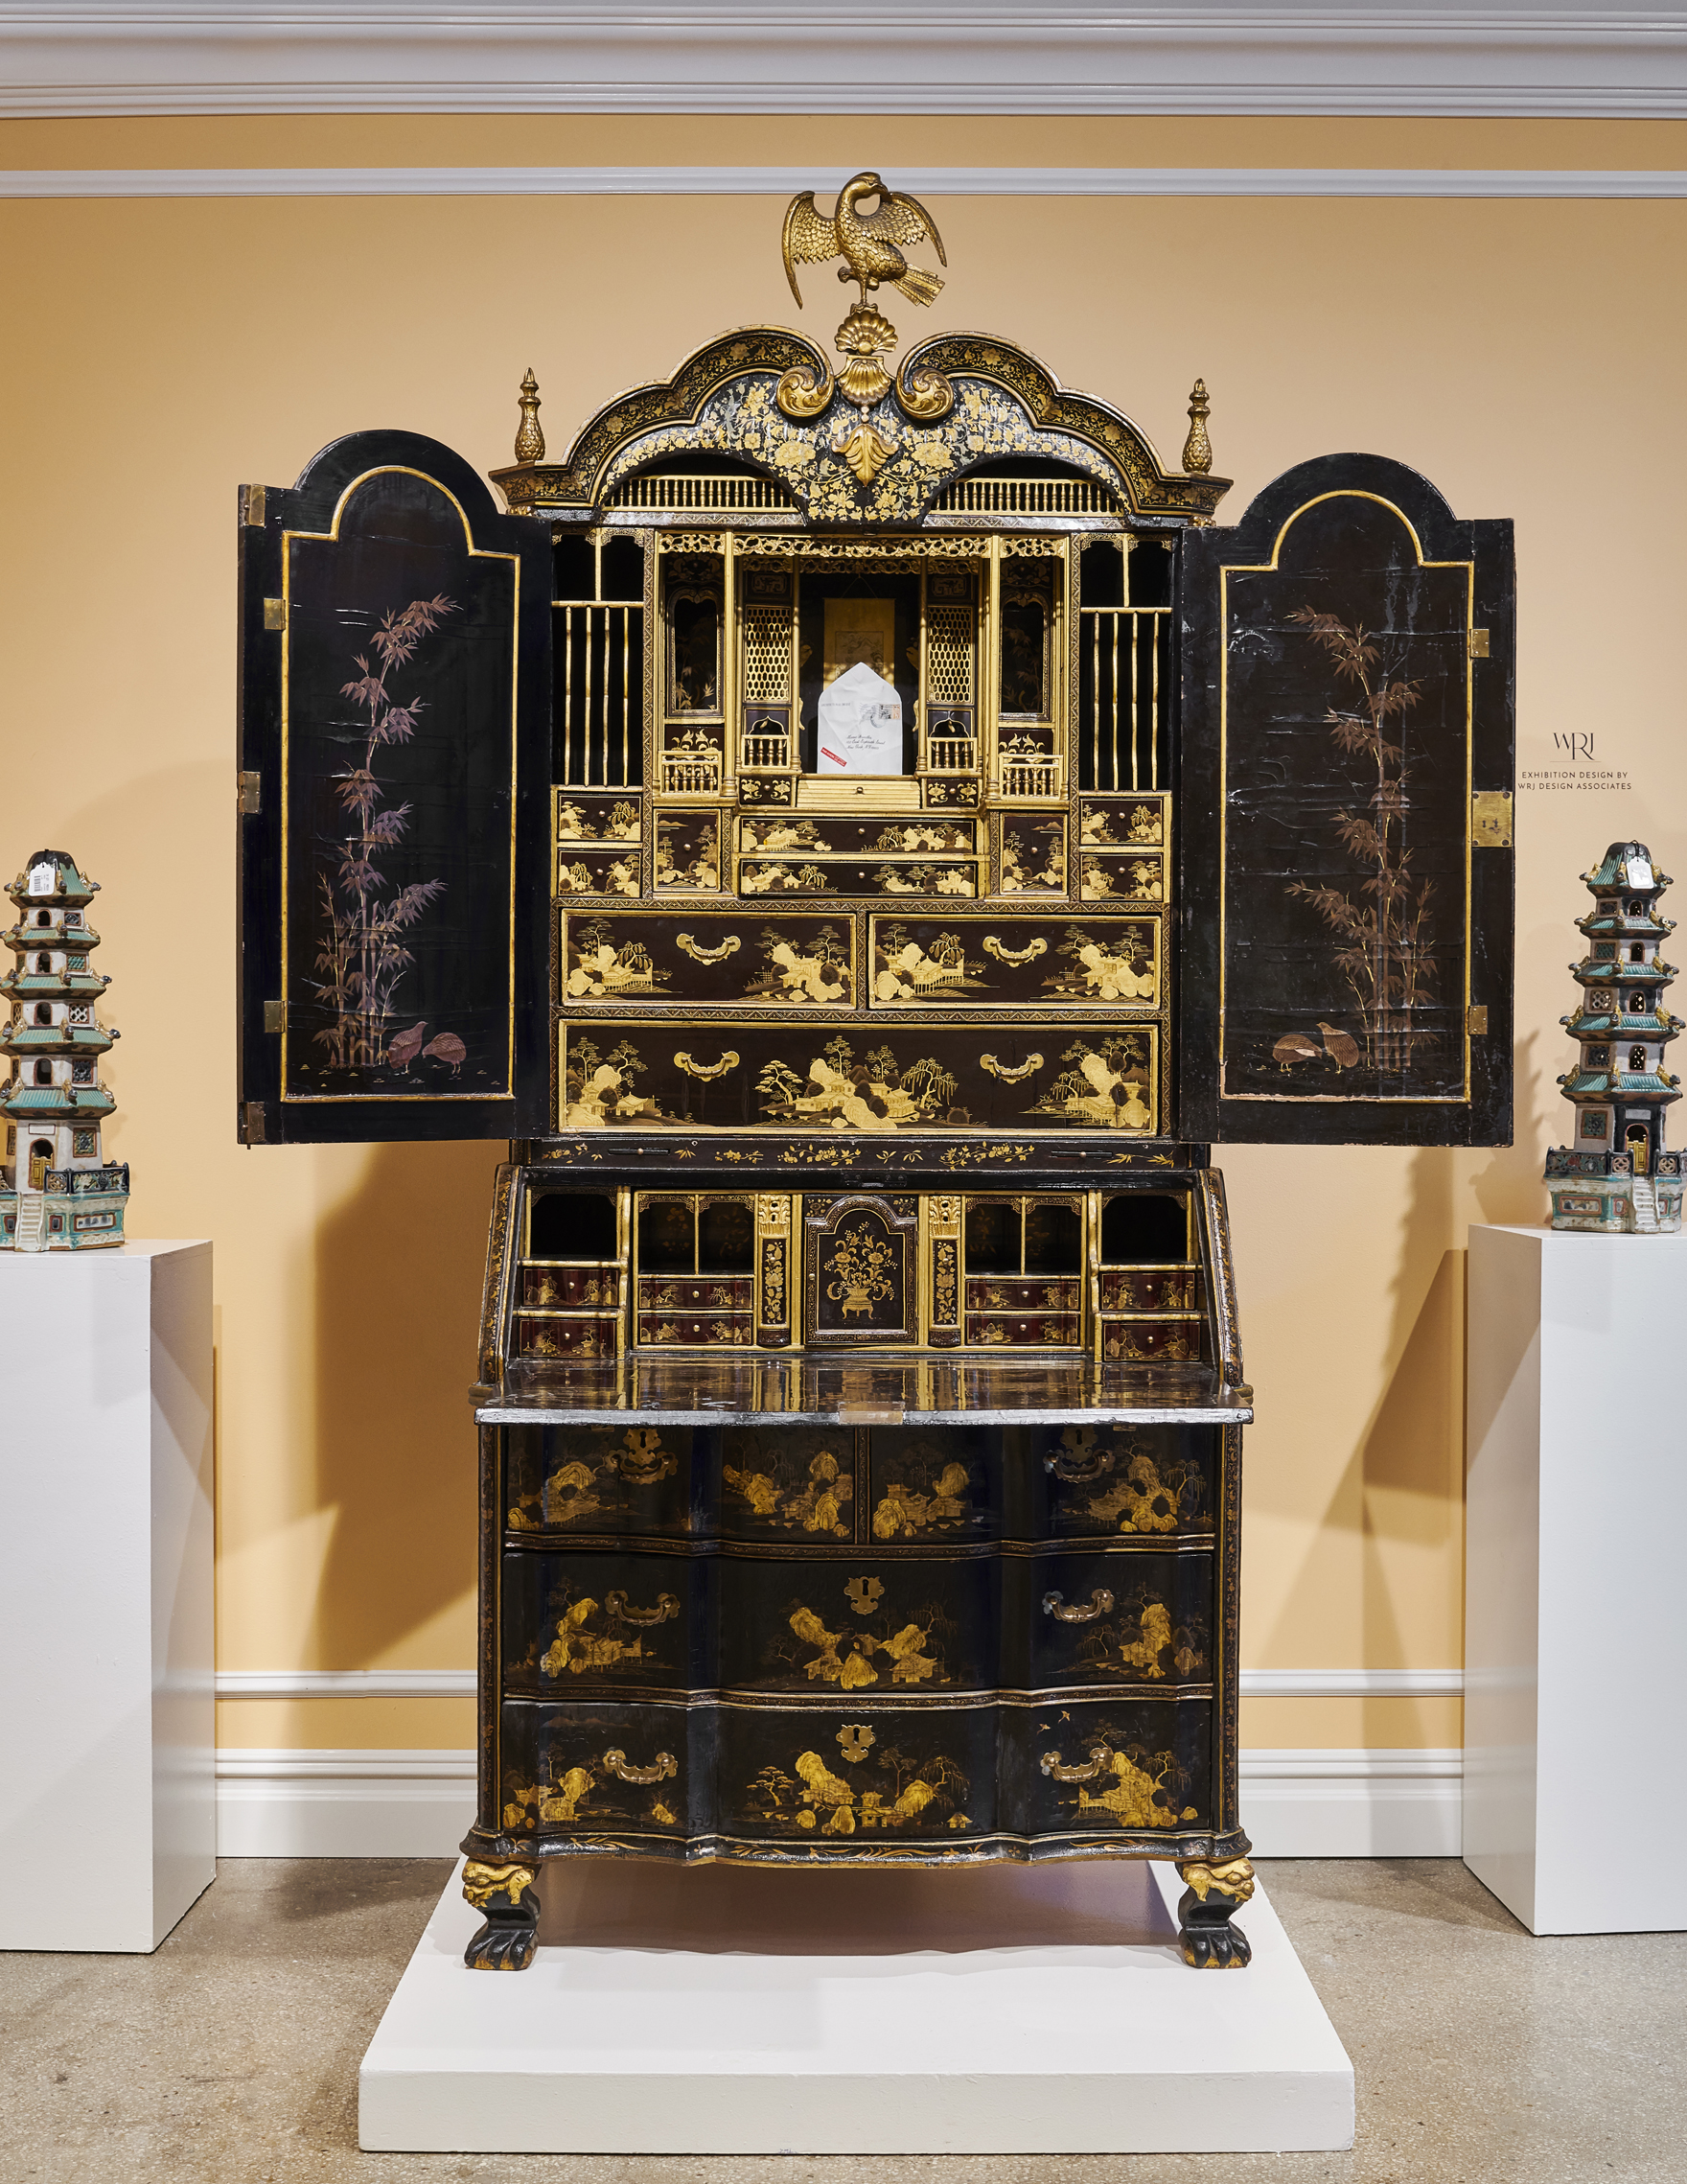 Mario Buatta’s black-and-gold lacquer secretary – a favorite of Rush Jenkins who designed the Sotheby’s exhibition – sold for $162k, more than twice its auction estimate (photo by Gabby Jones).